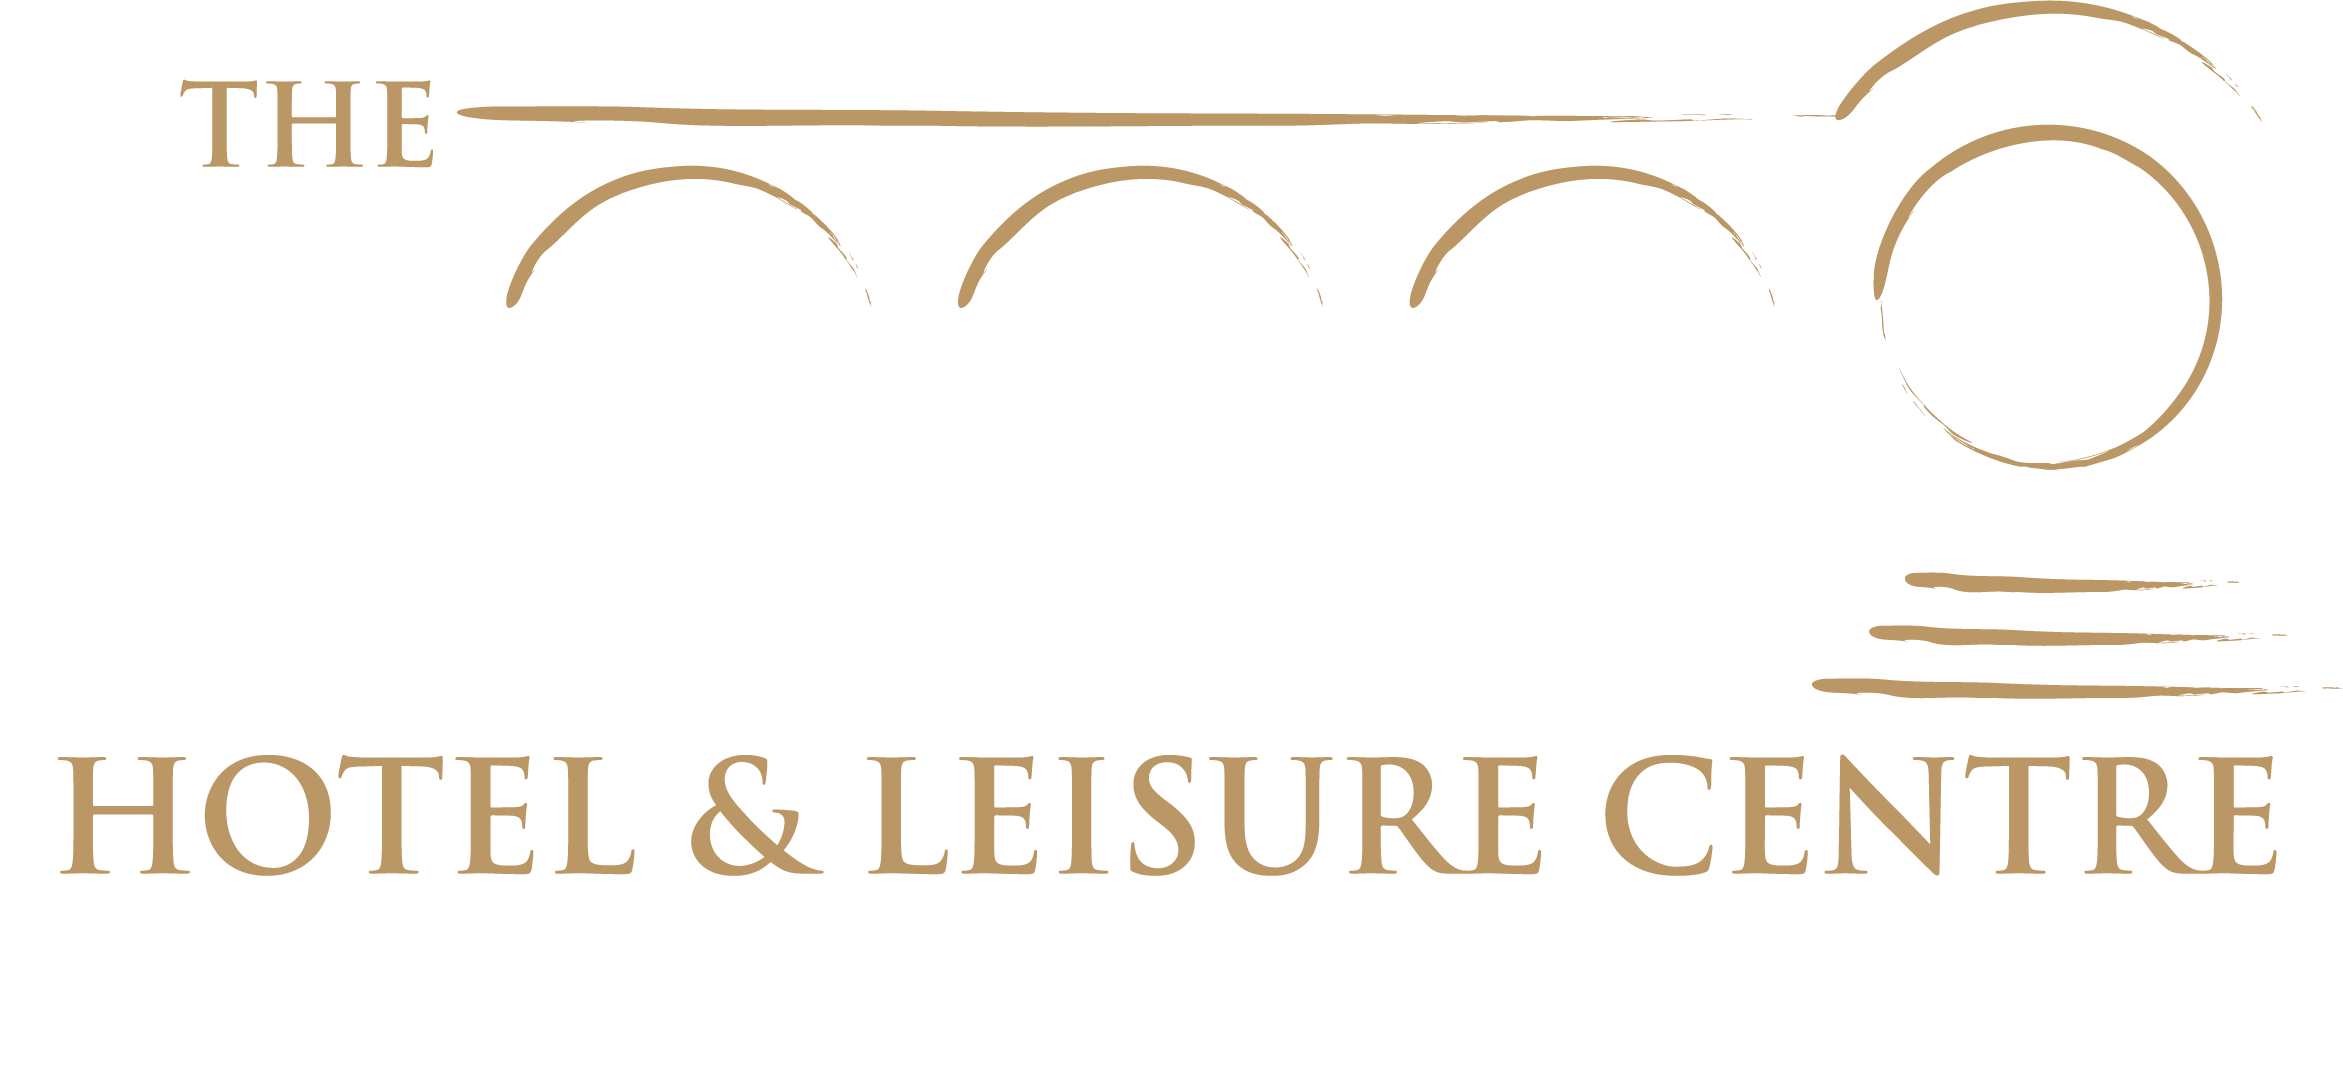 The Lakeside Hotel & Leisure Centre